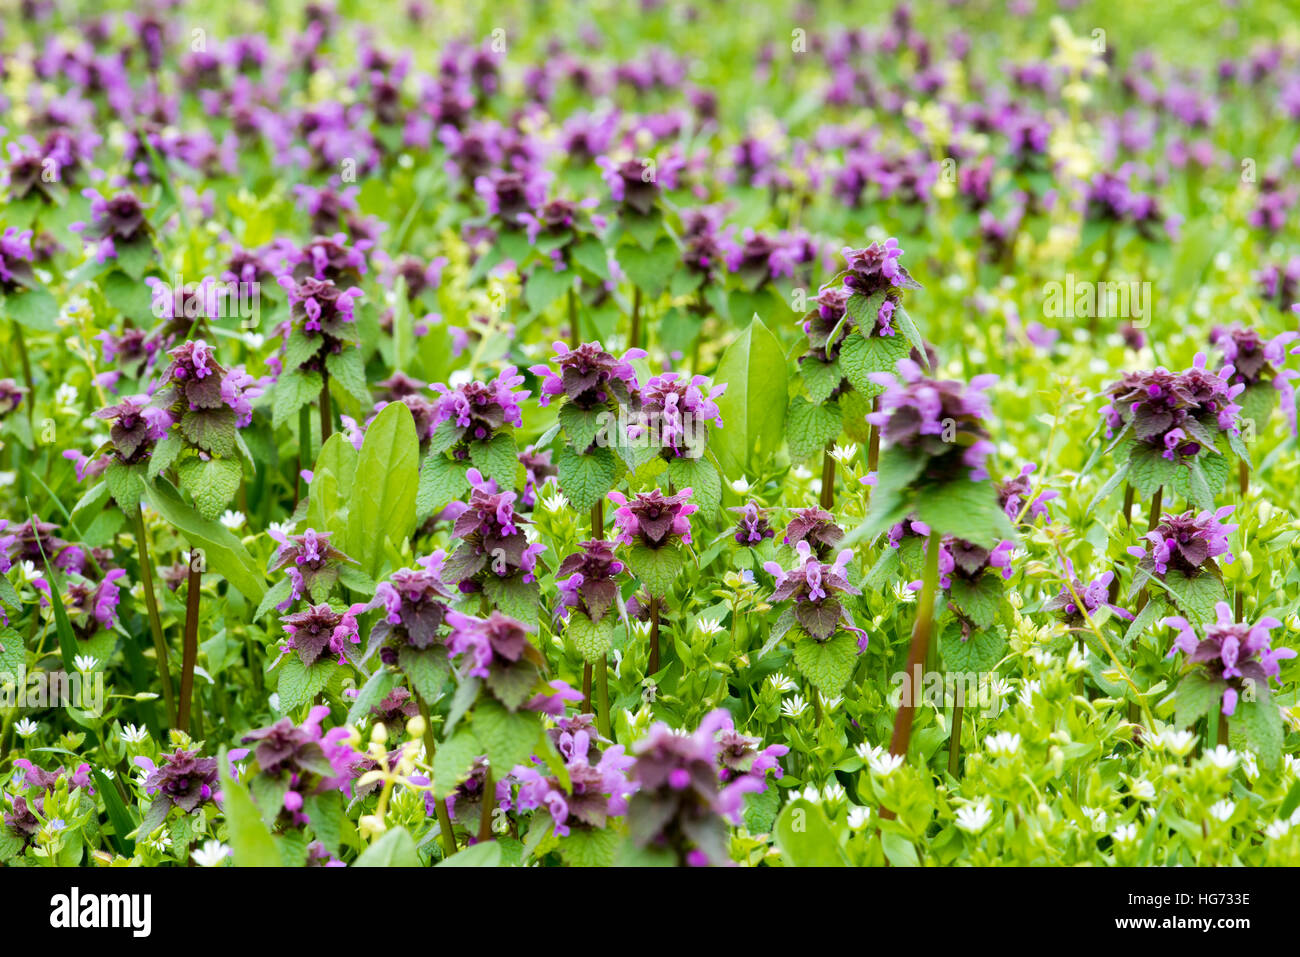 Purple flowers in the field in natural light Stock Photo